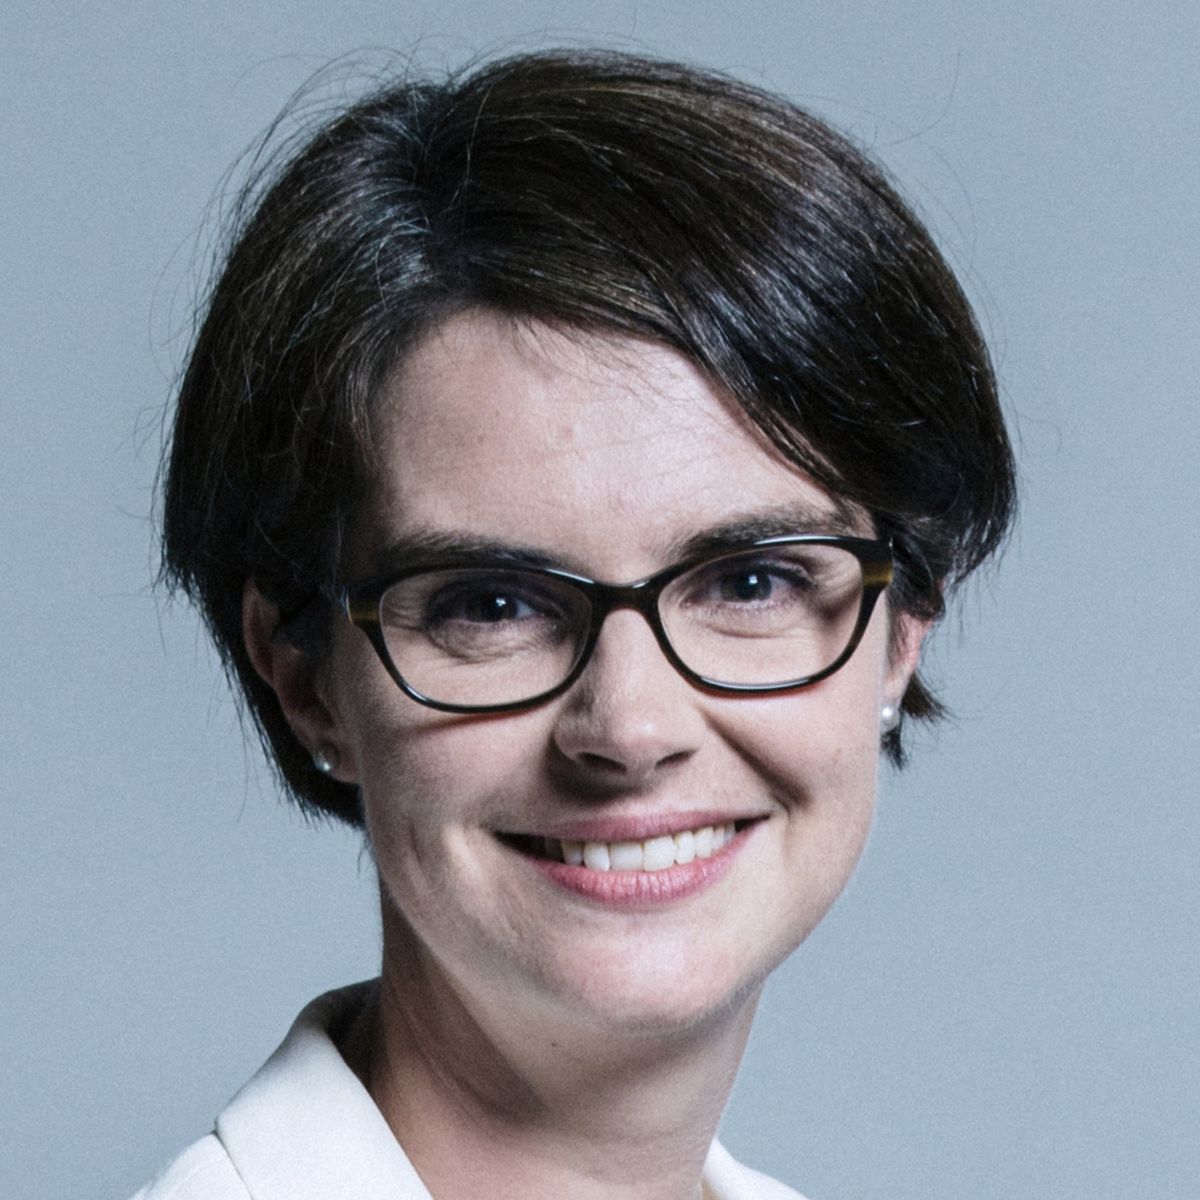 Chloe Smith MP, Minister for Disabled People, Health and Work